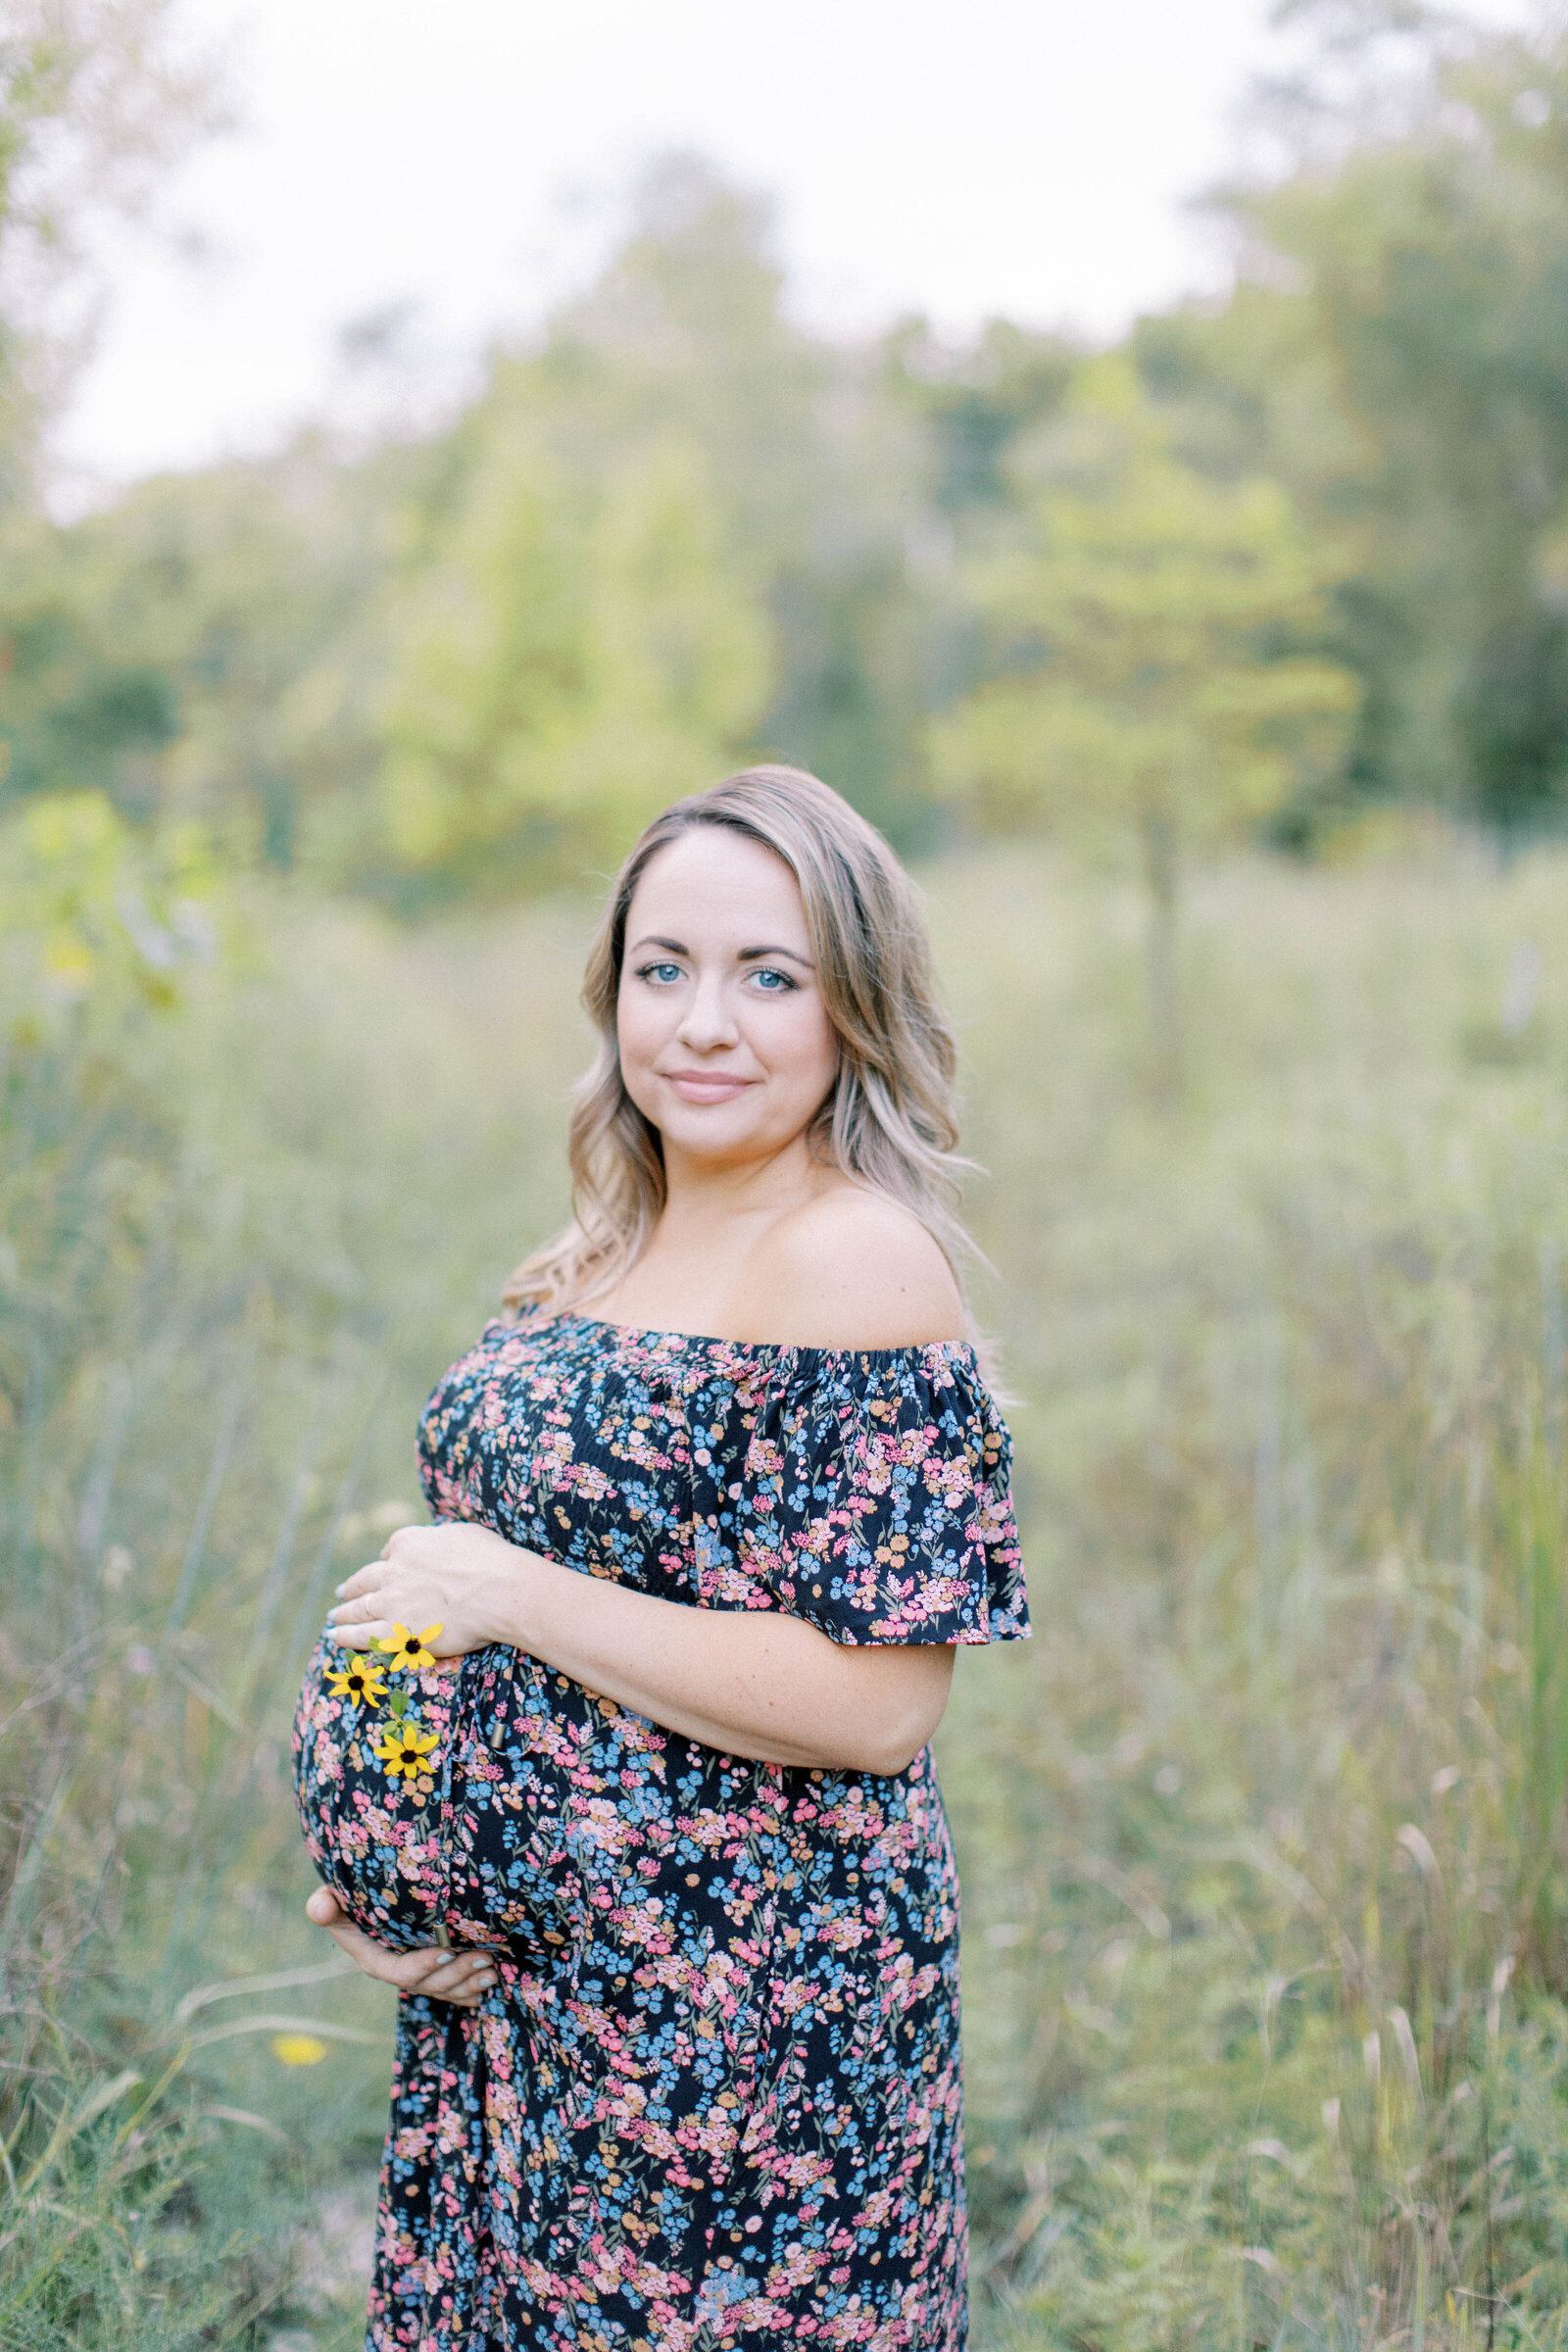 Floral wildflower maternity photos at Hartman Memorial Park in Less Summit